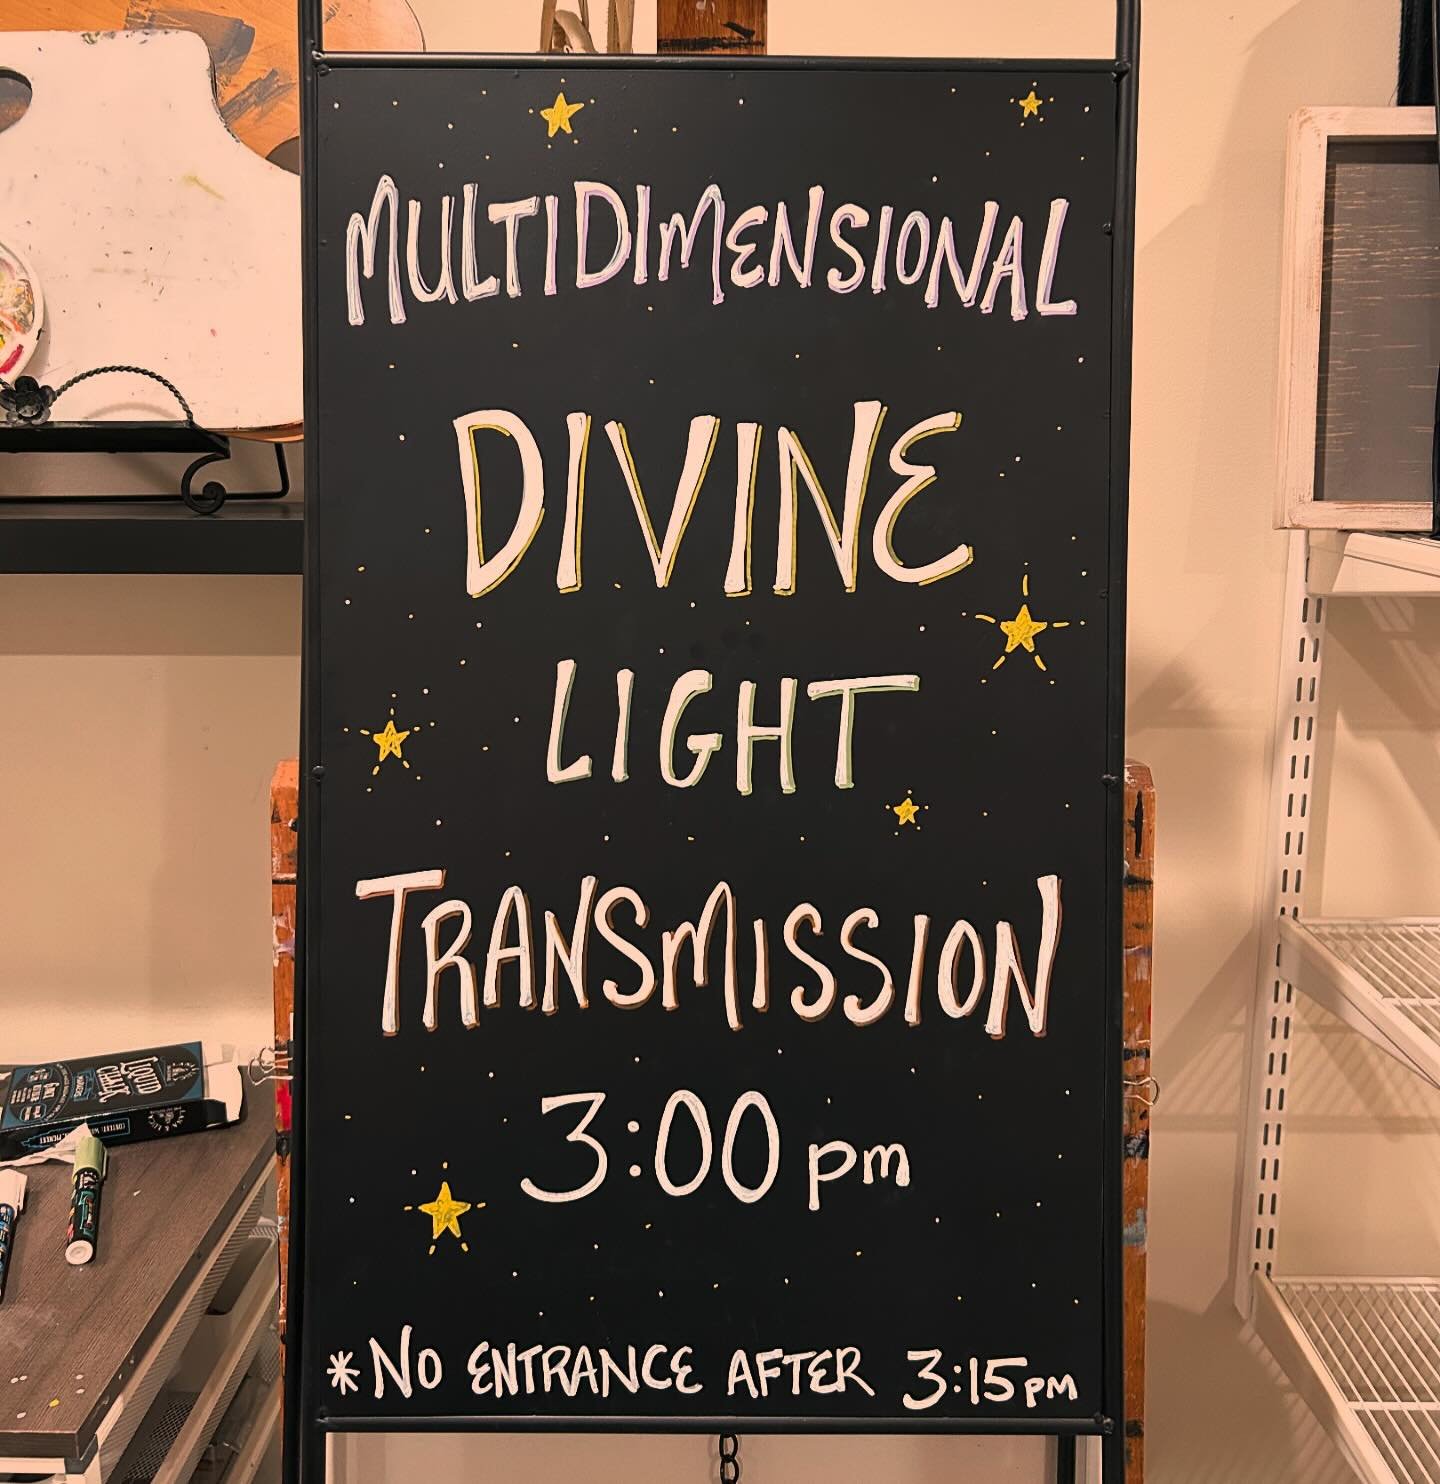 ☀️ Gearing up for the next FREE group offering of MDLT this Sunday in Nashville. A few open spaces remain. DM for location and registration info if you will be in the Nashville area and feel ♾️alignment ♾️ and resonance. 

'May all possibilities be o